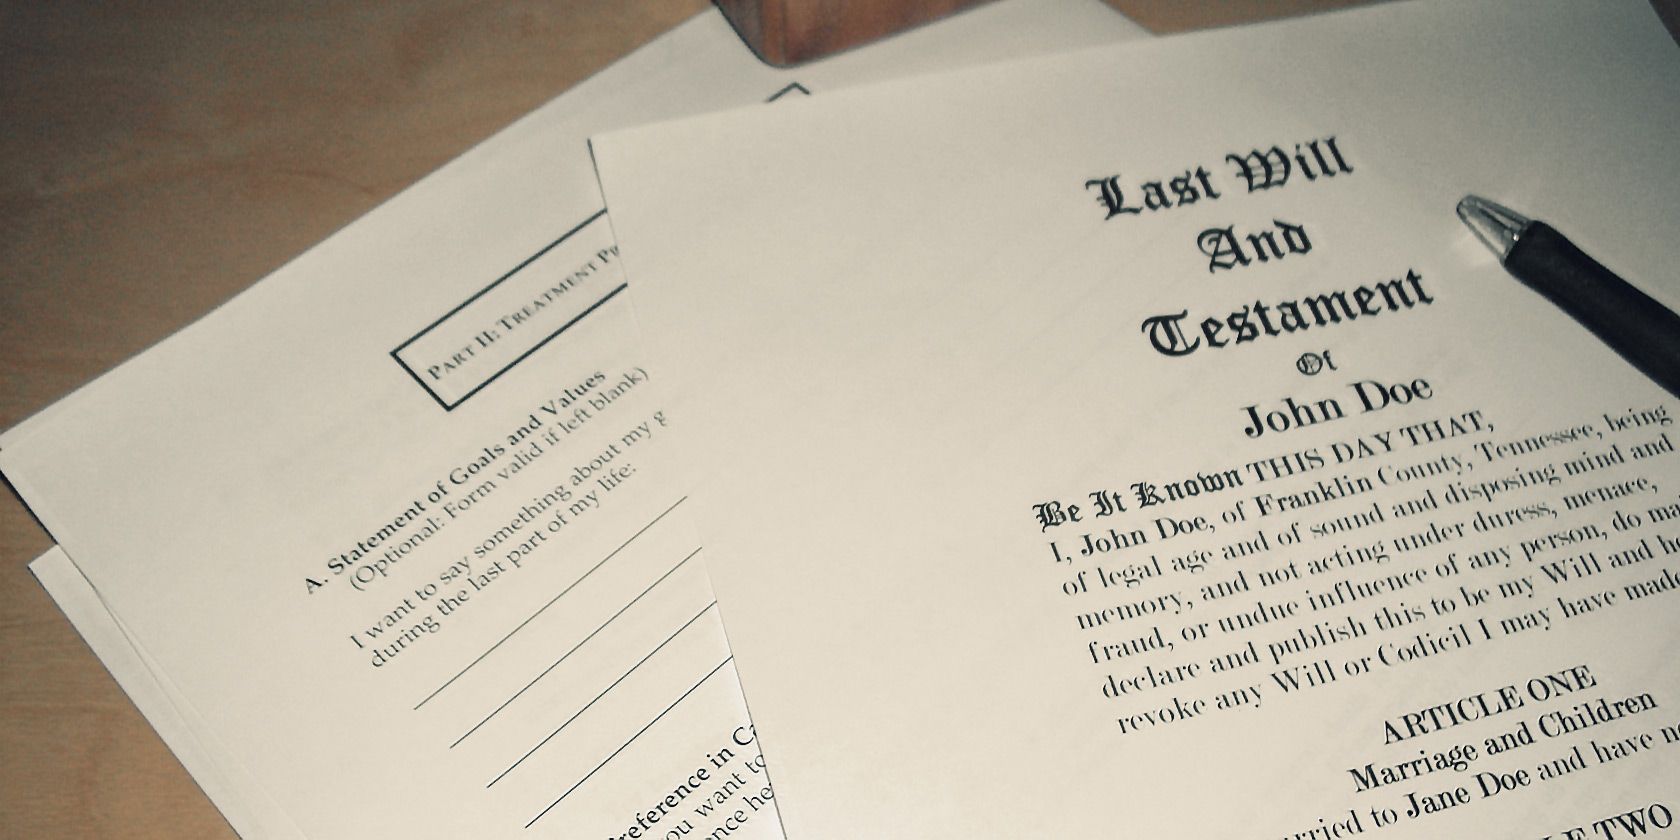 last will and testament on table with a pen